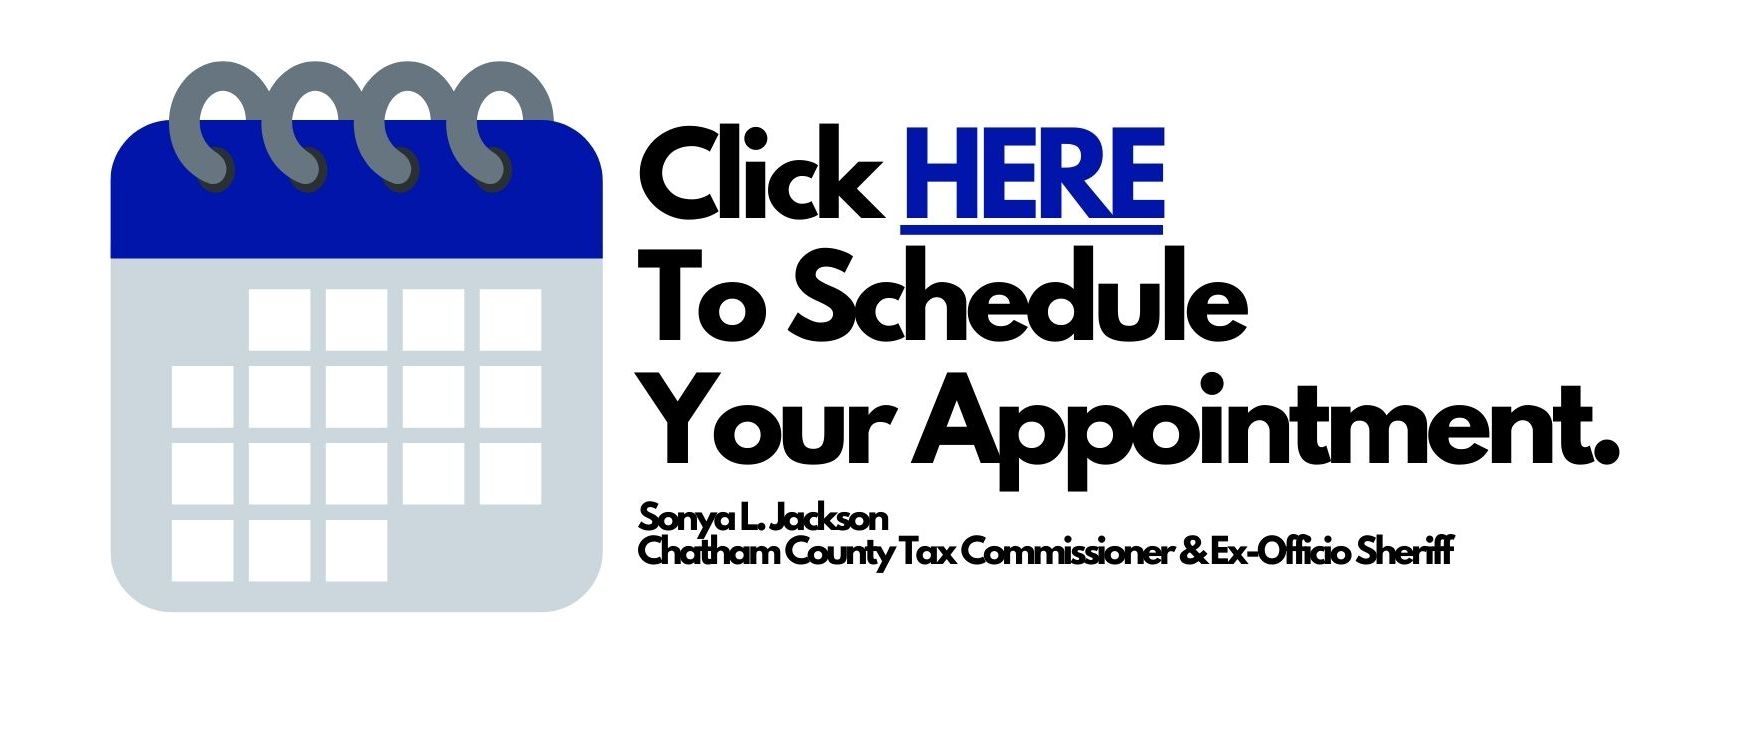 Slide 5 - Schedule an Appointment